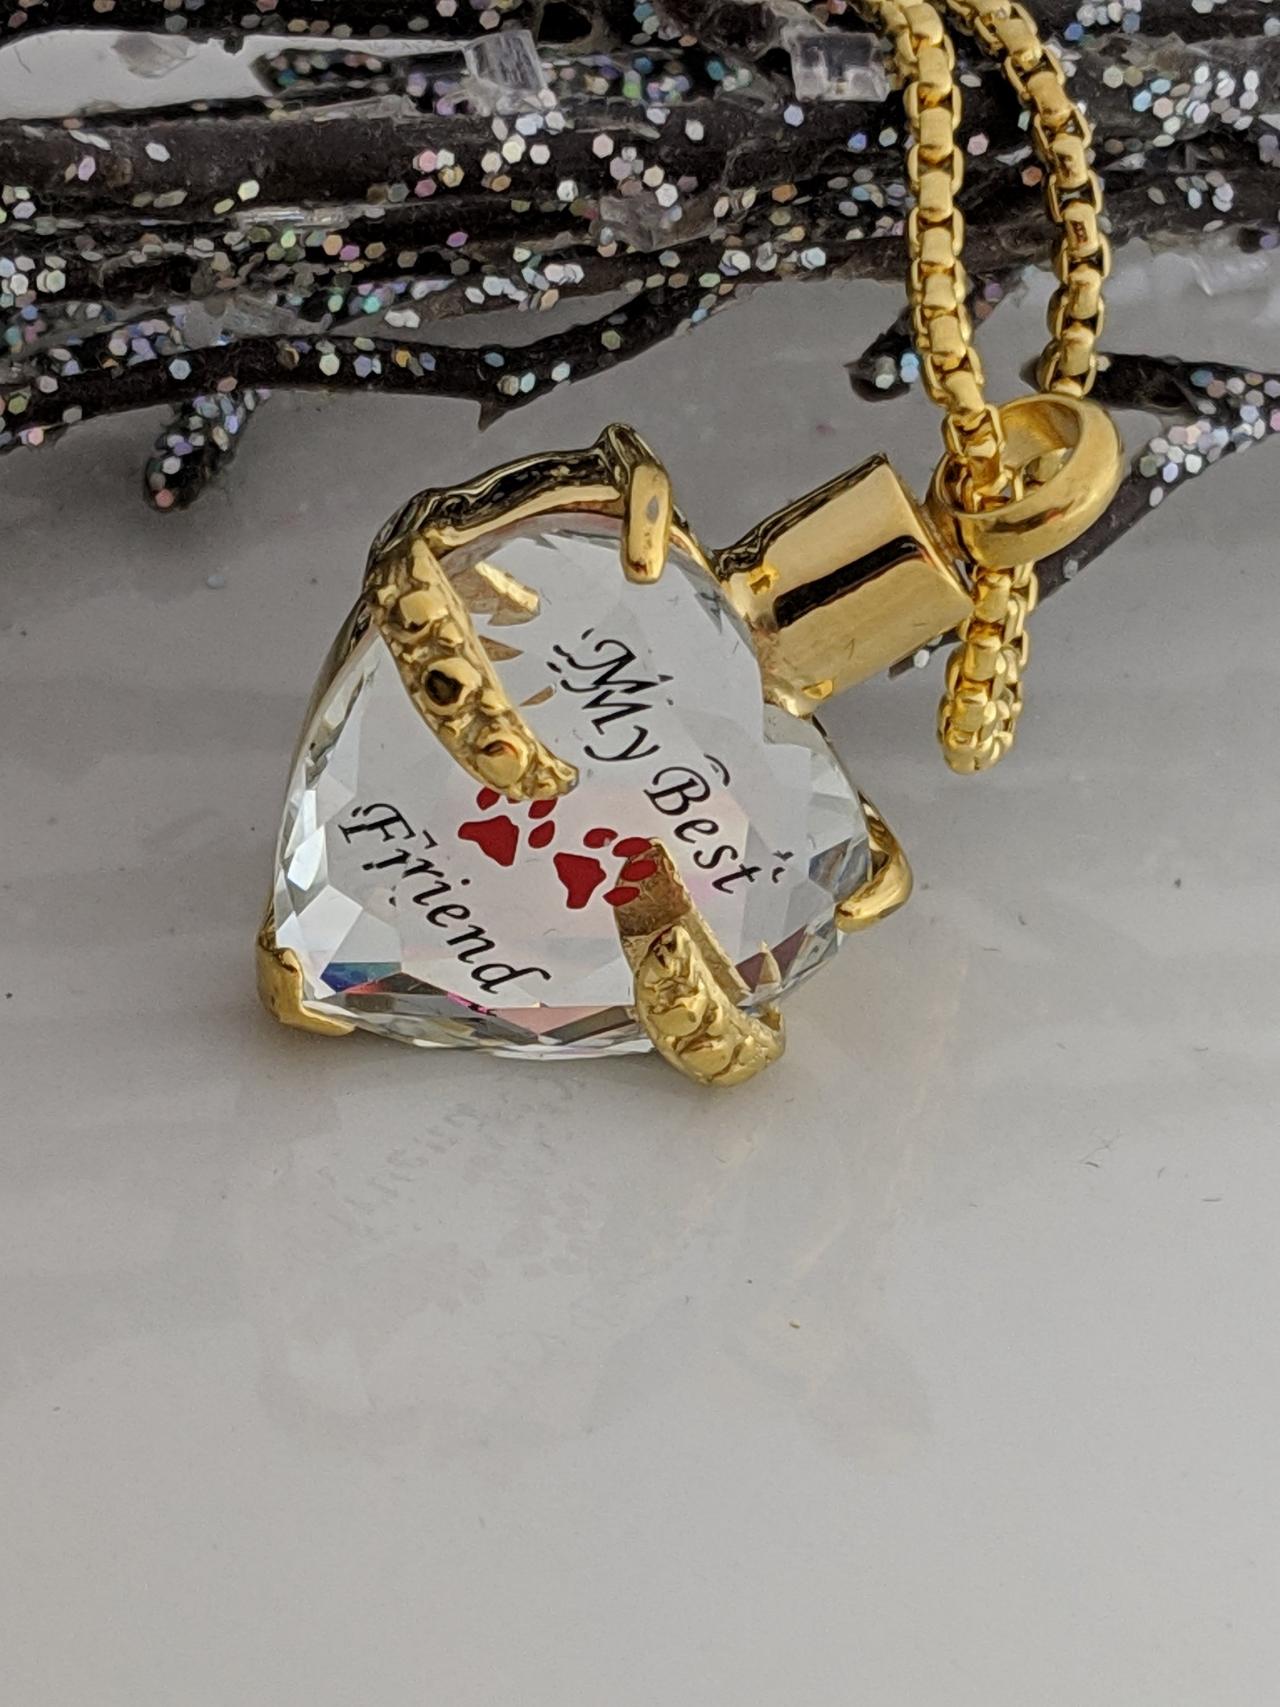 Ready To Ship - Hand Stamped Necklace Gold Heart Pet Urn - Pet Ash Holder - Hand Stamped Keepsake. Jewelry - My Friend - Paw Print - Cremation